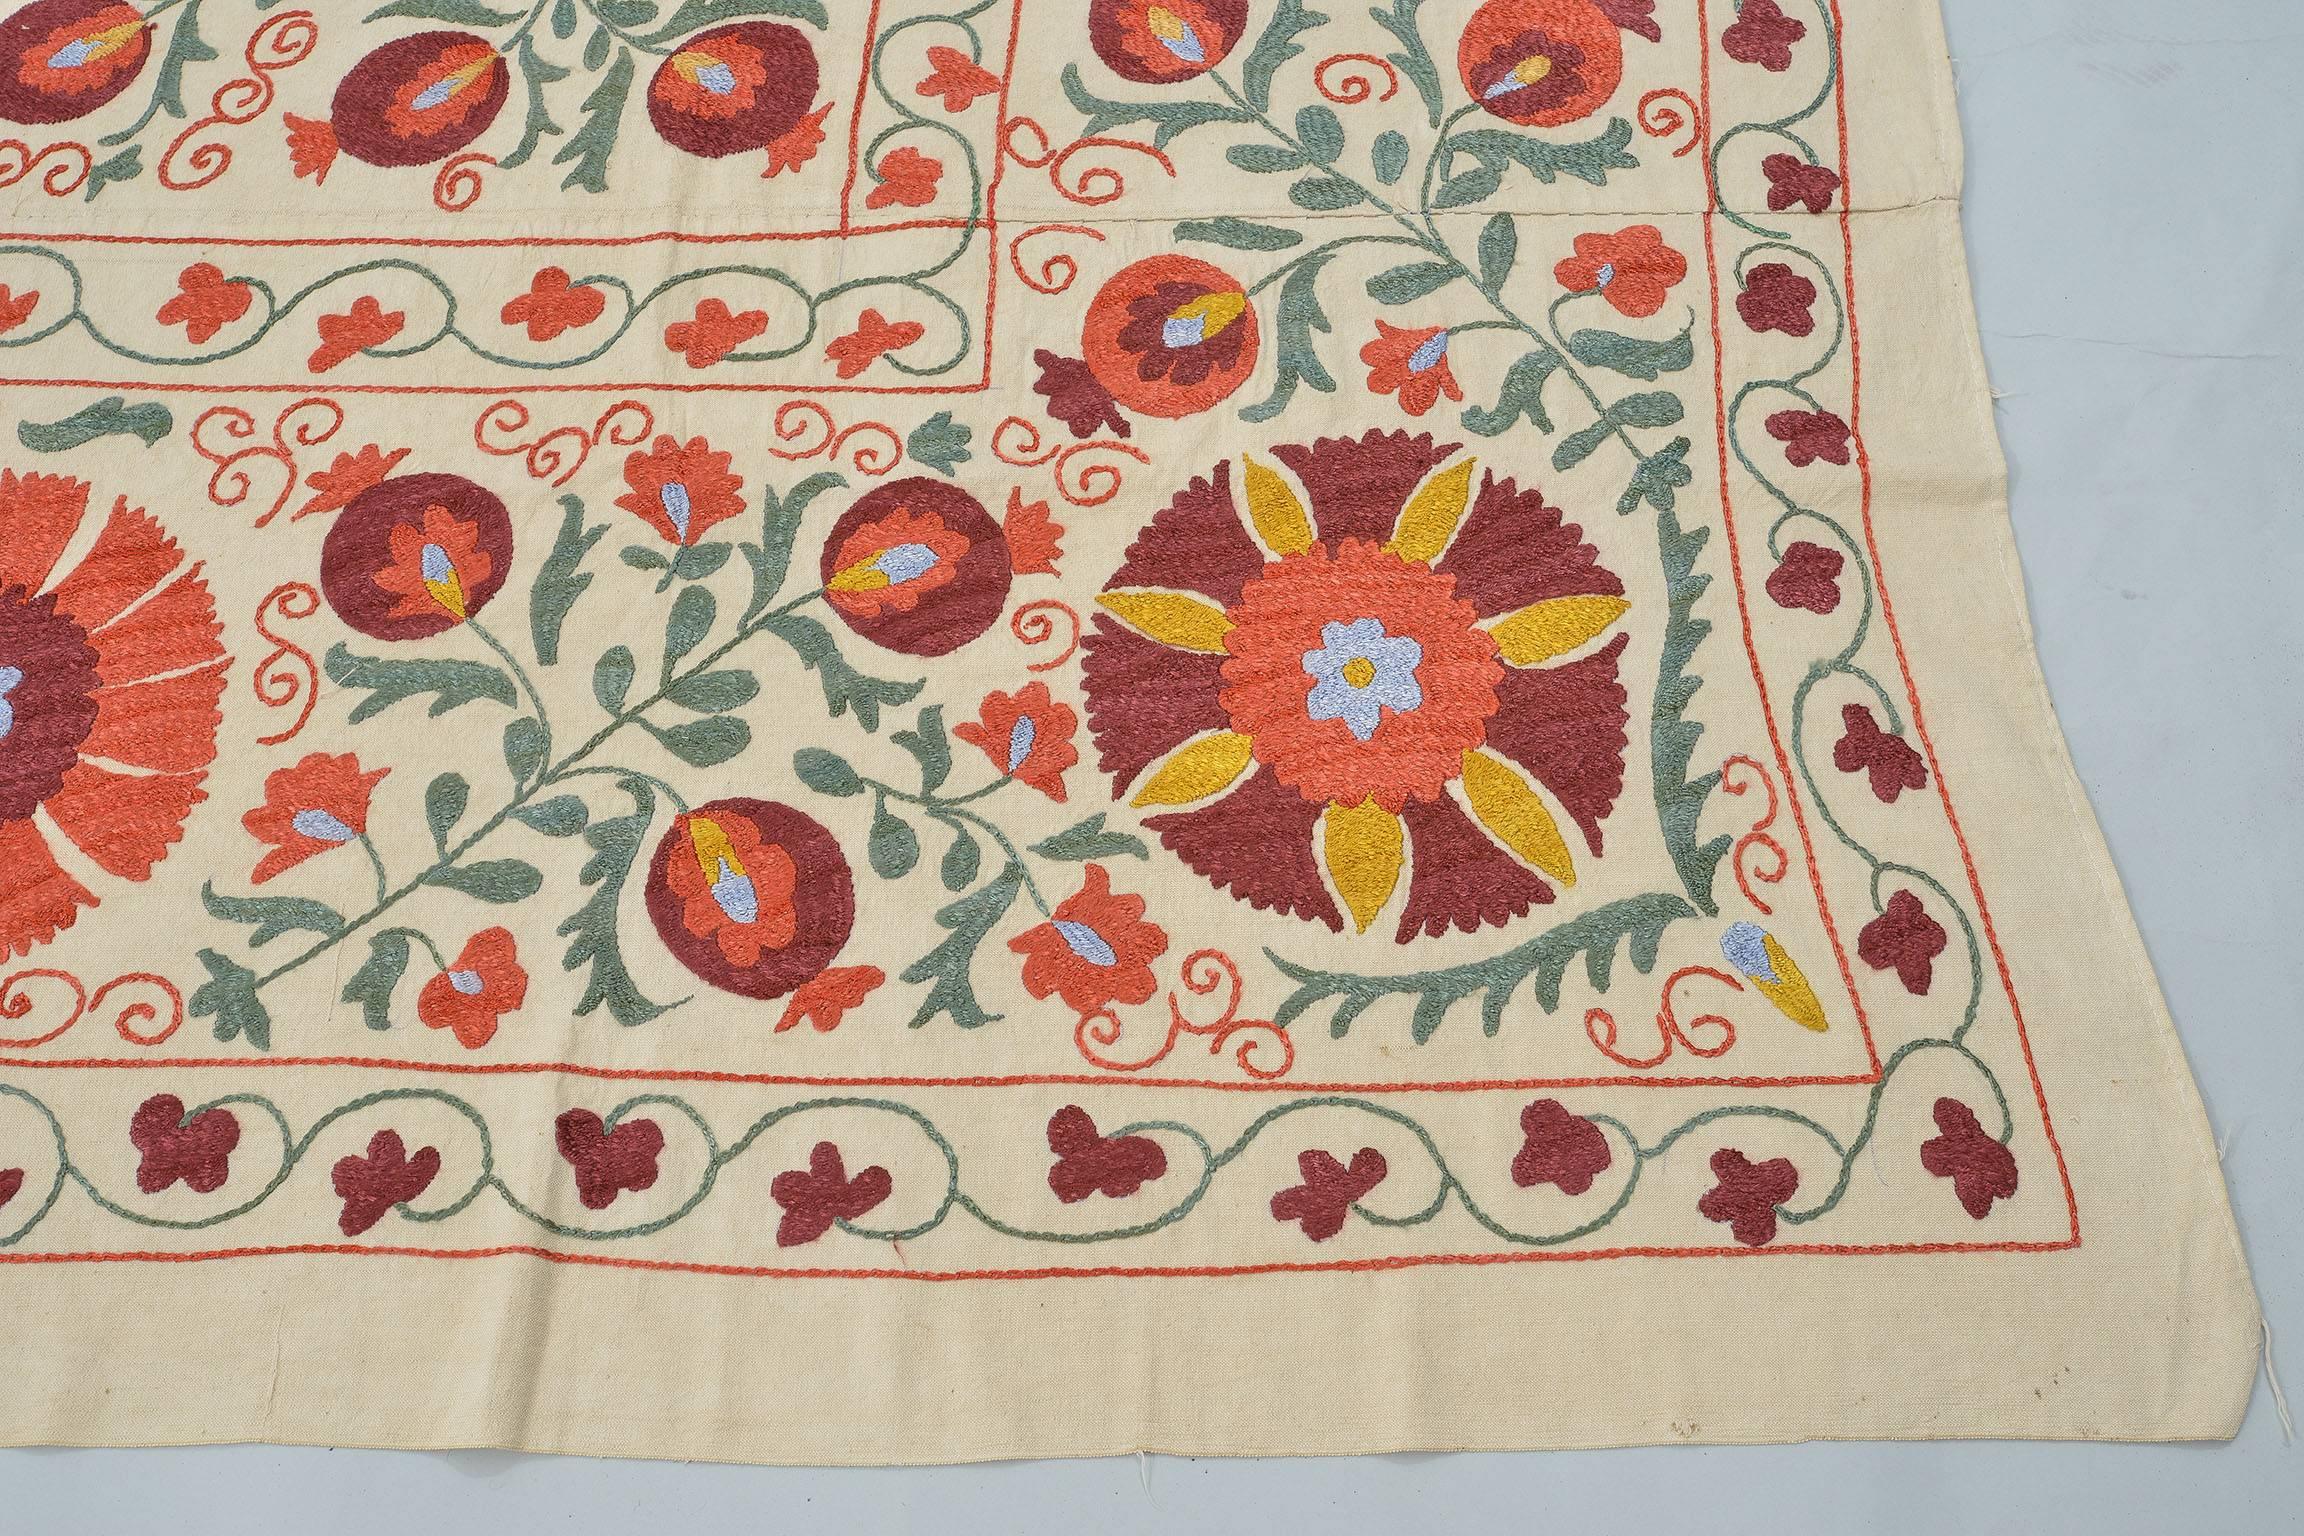 Hand-Woven  Susani Silk  Embroidery, Suitable for Bed or Table Cover or Wall hanging